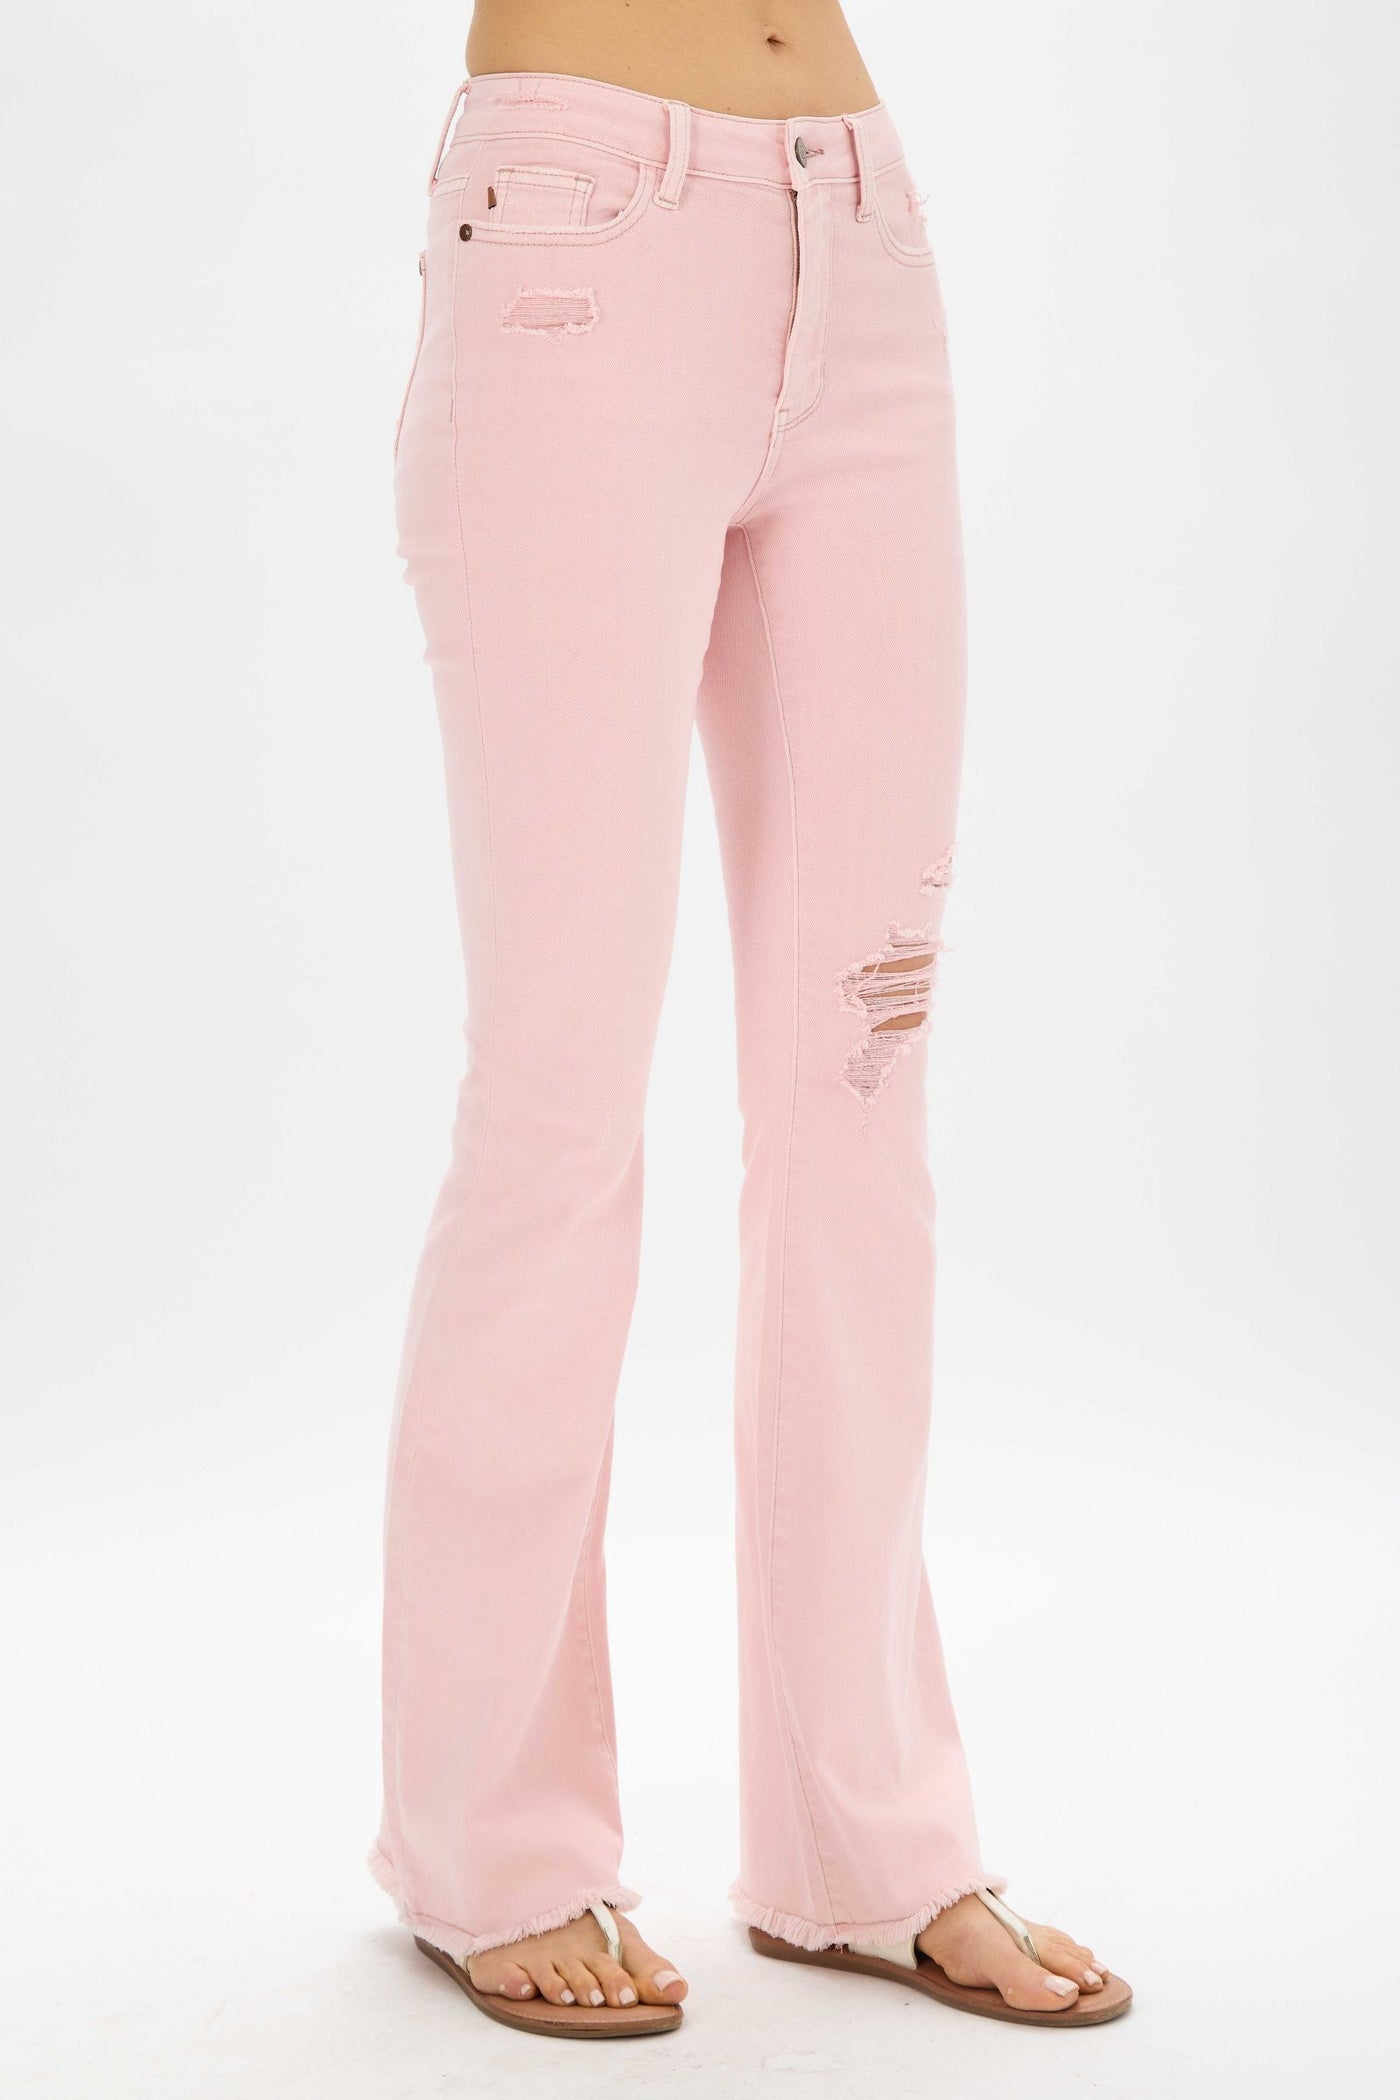 Judy Blue Candy Clouds Pink Distressed Denim Flares